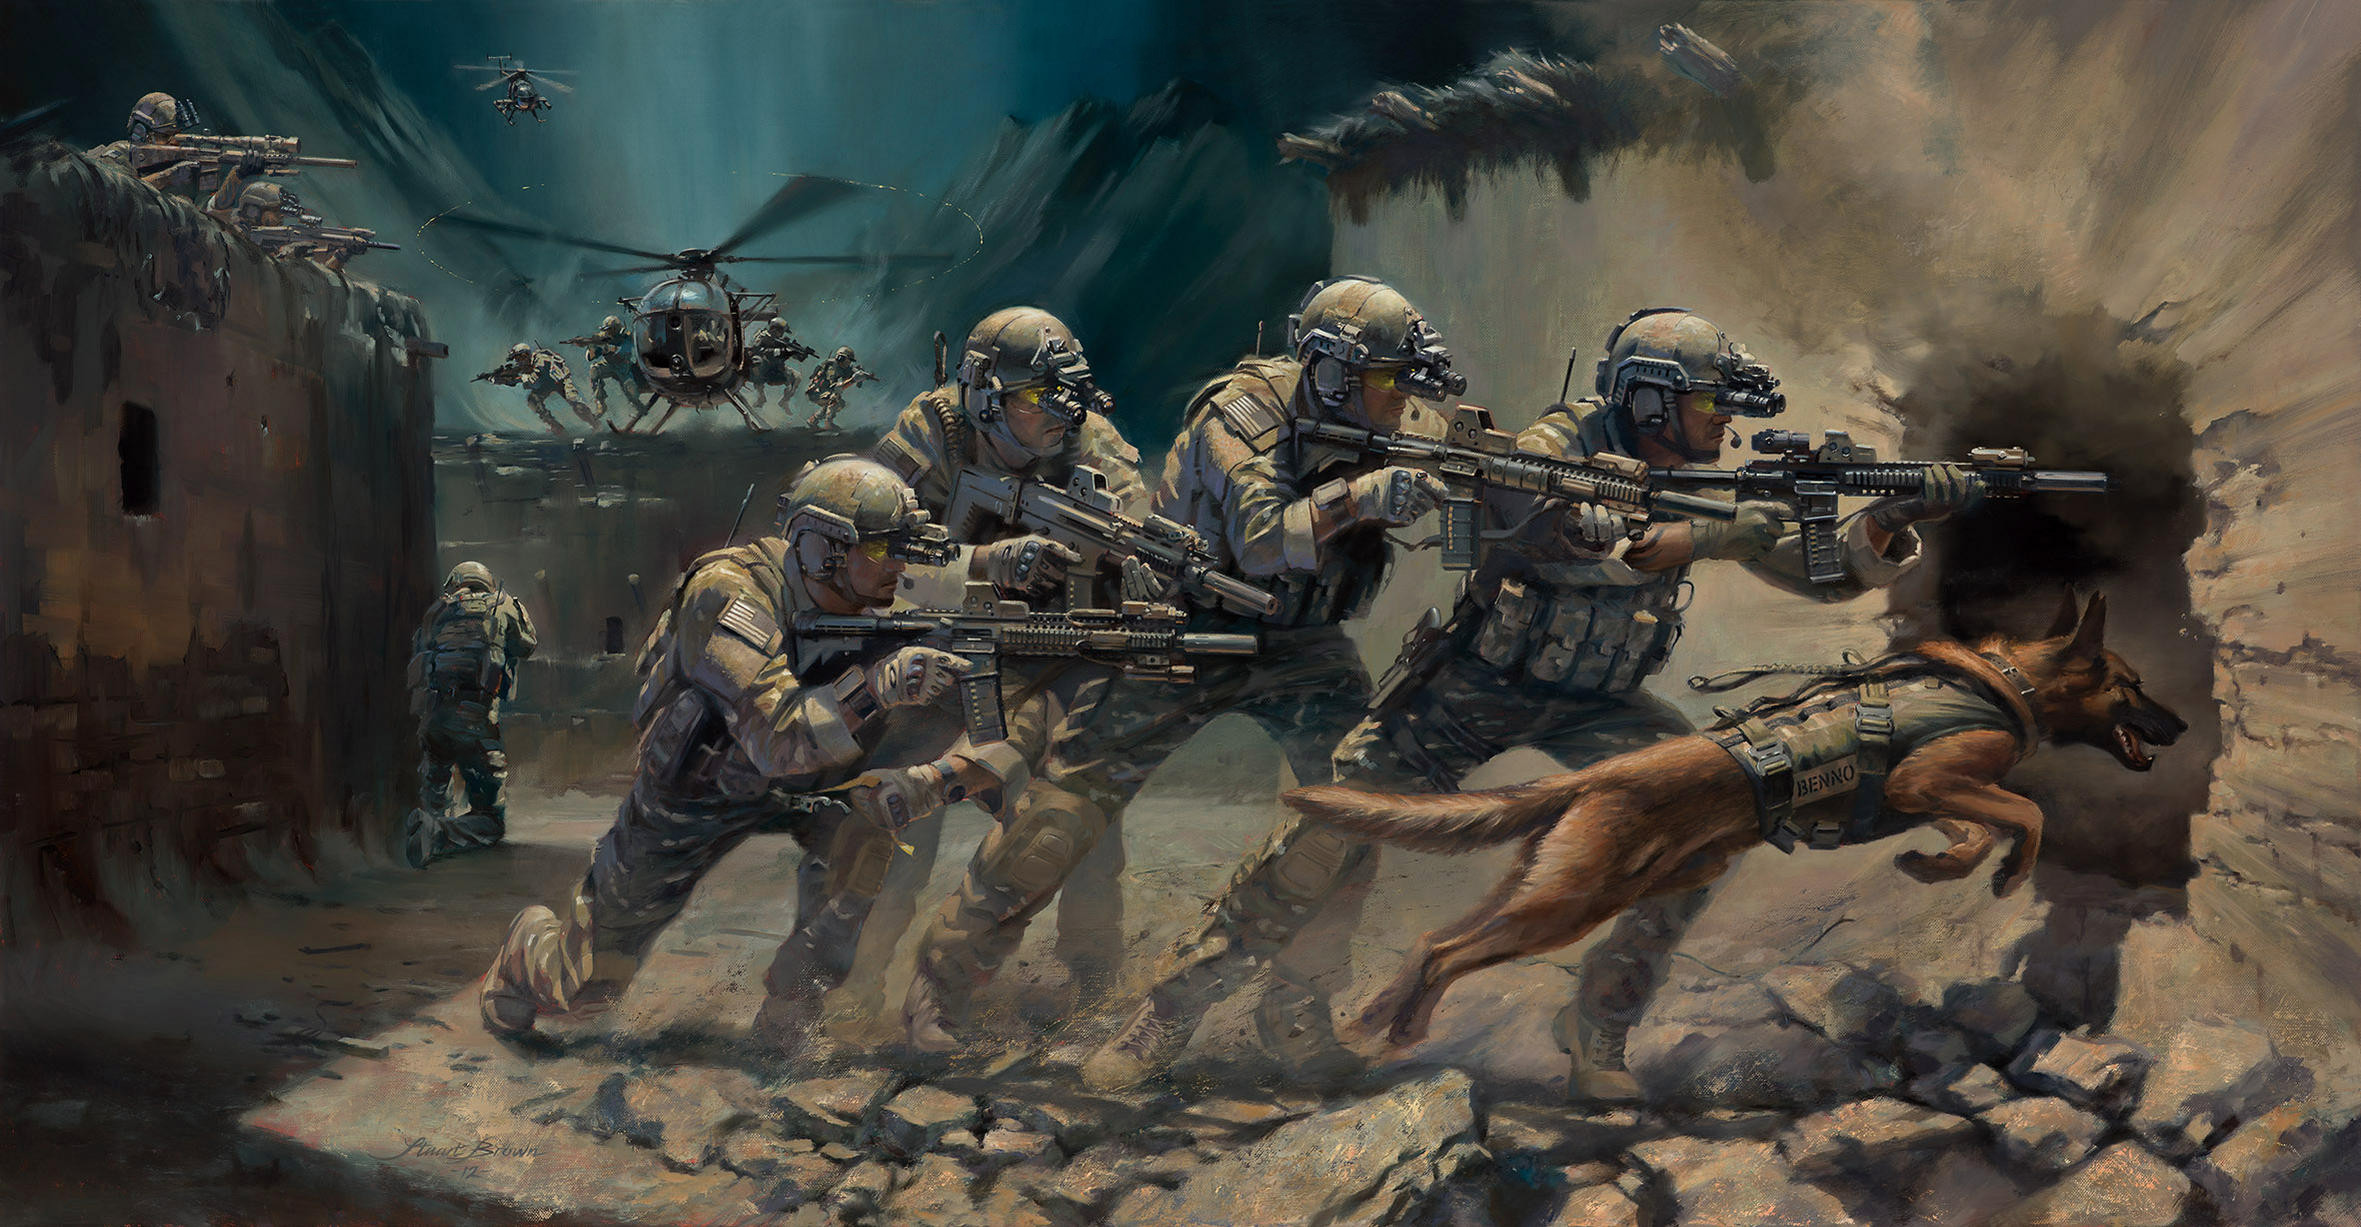 Download wallpaper art, soldiers, special forces, assault rifles, weapons,  equipment,